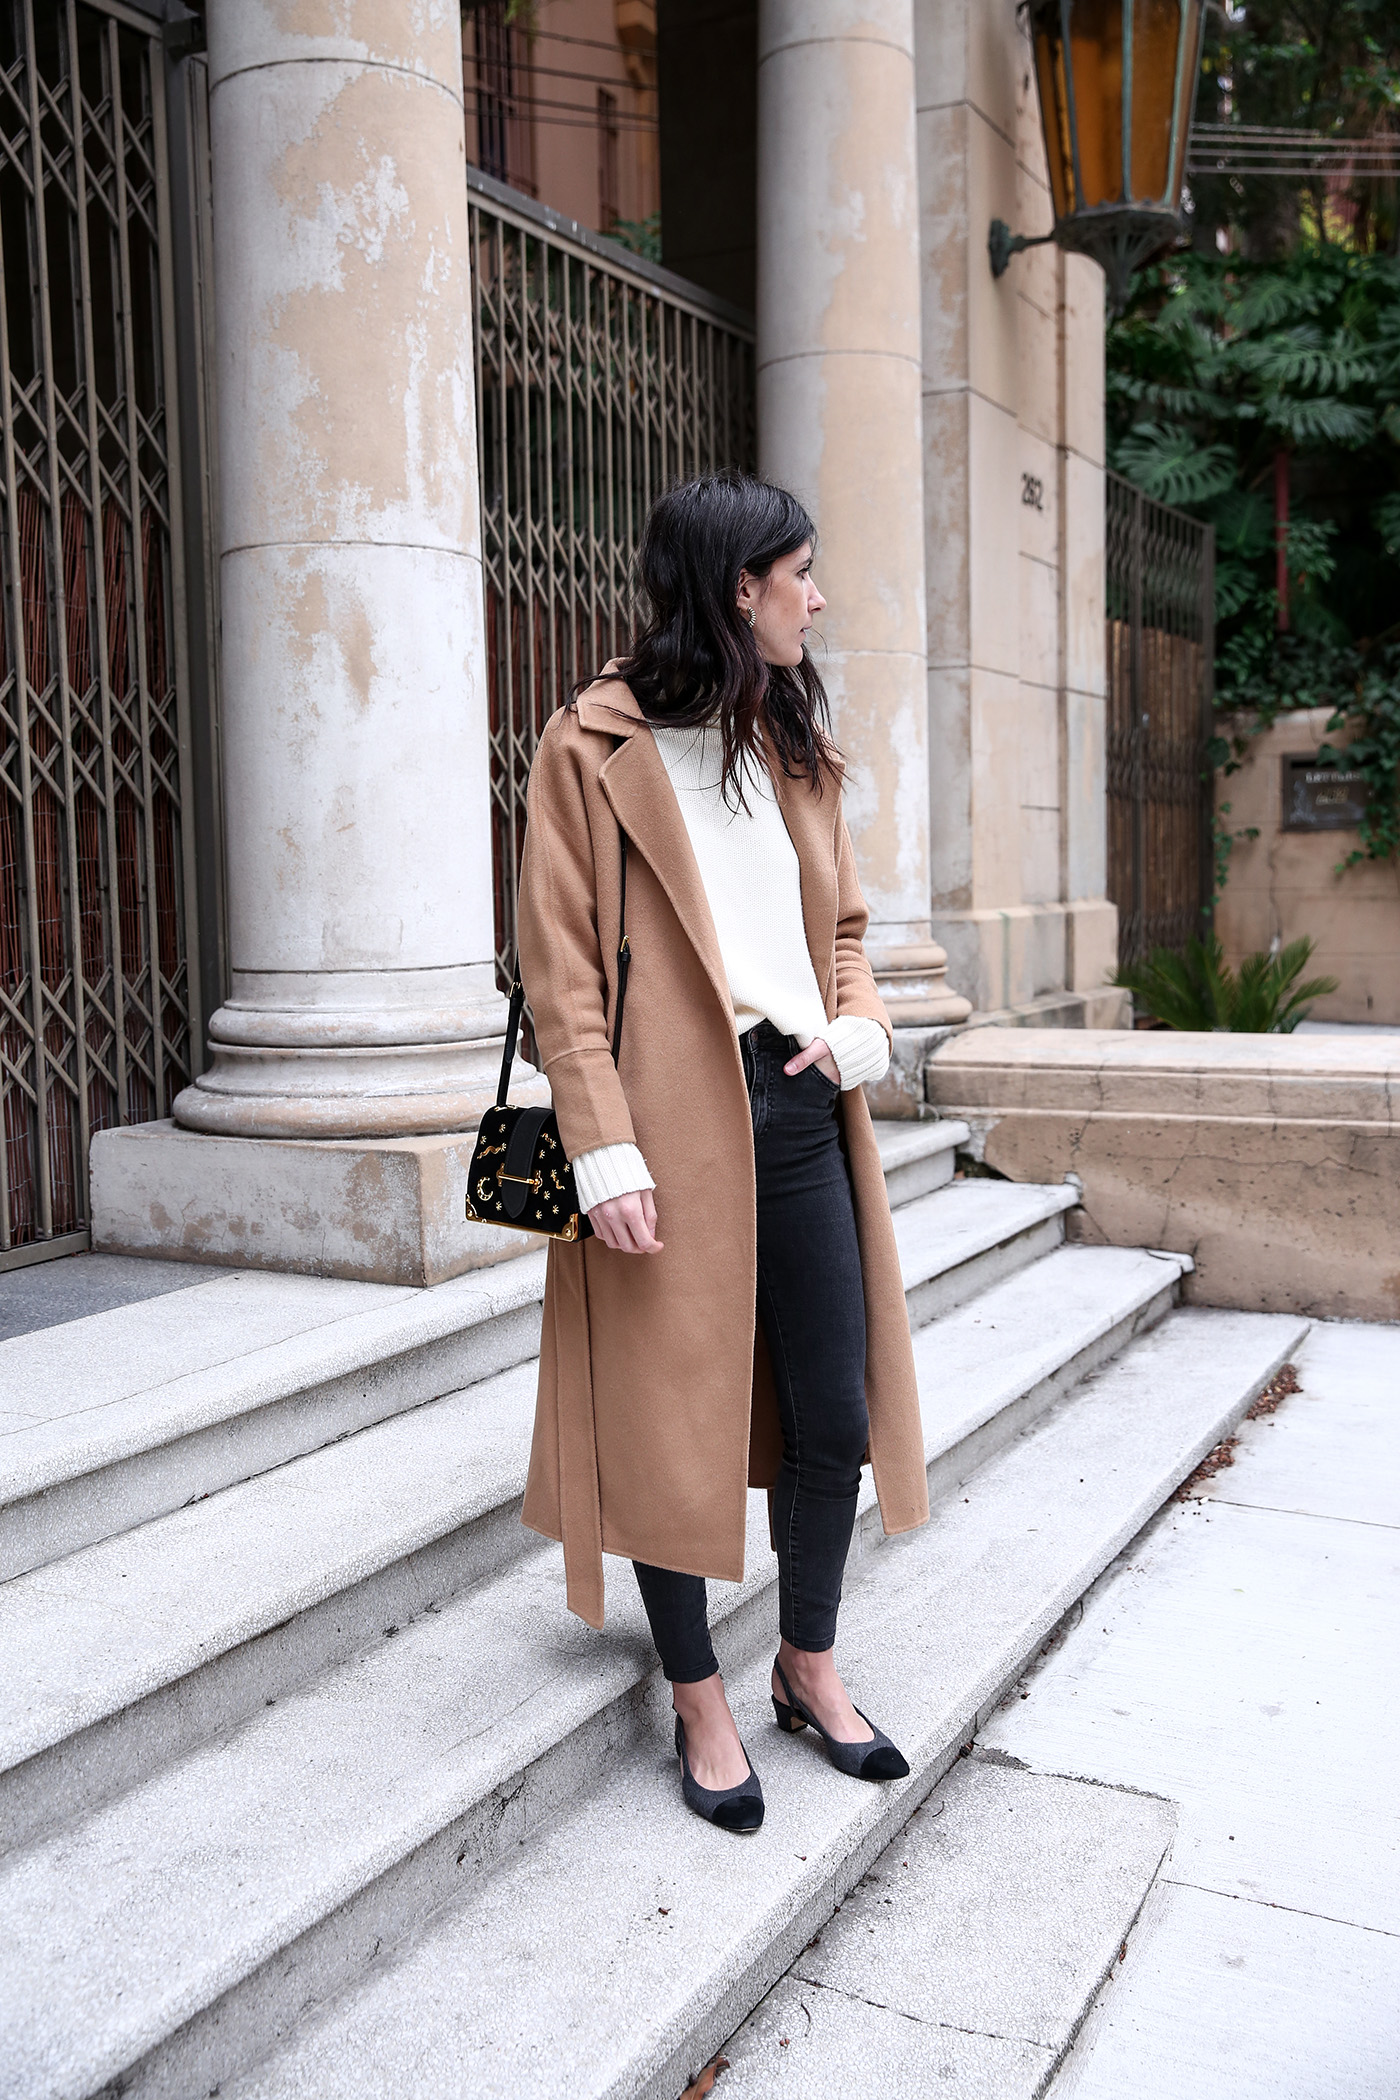 Minimal winter outfit wearing a camel coat with an oversized sweater and skinny jeans